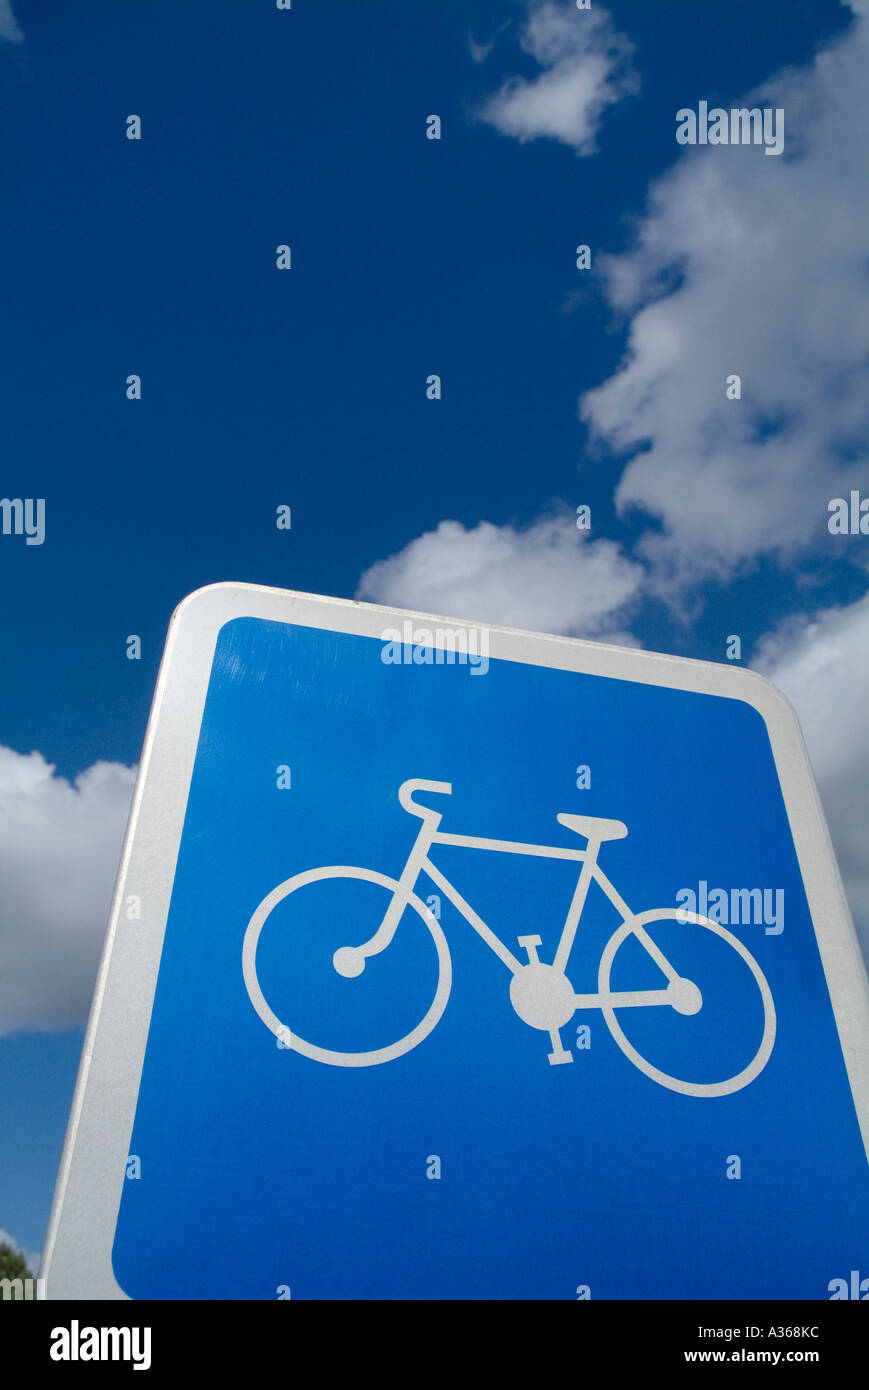 Bicycle sign on a bicycle lane Stock Photo